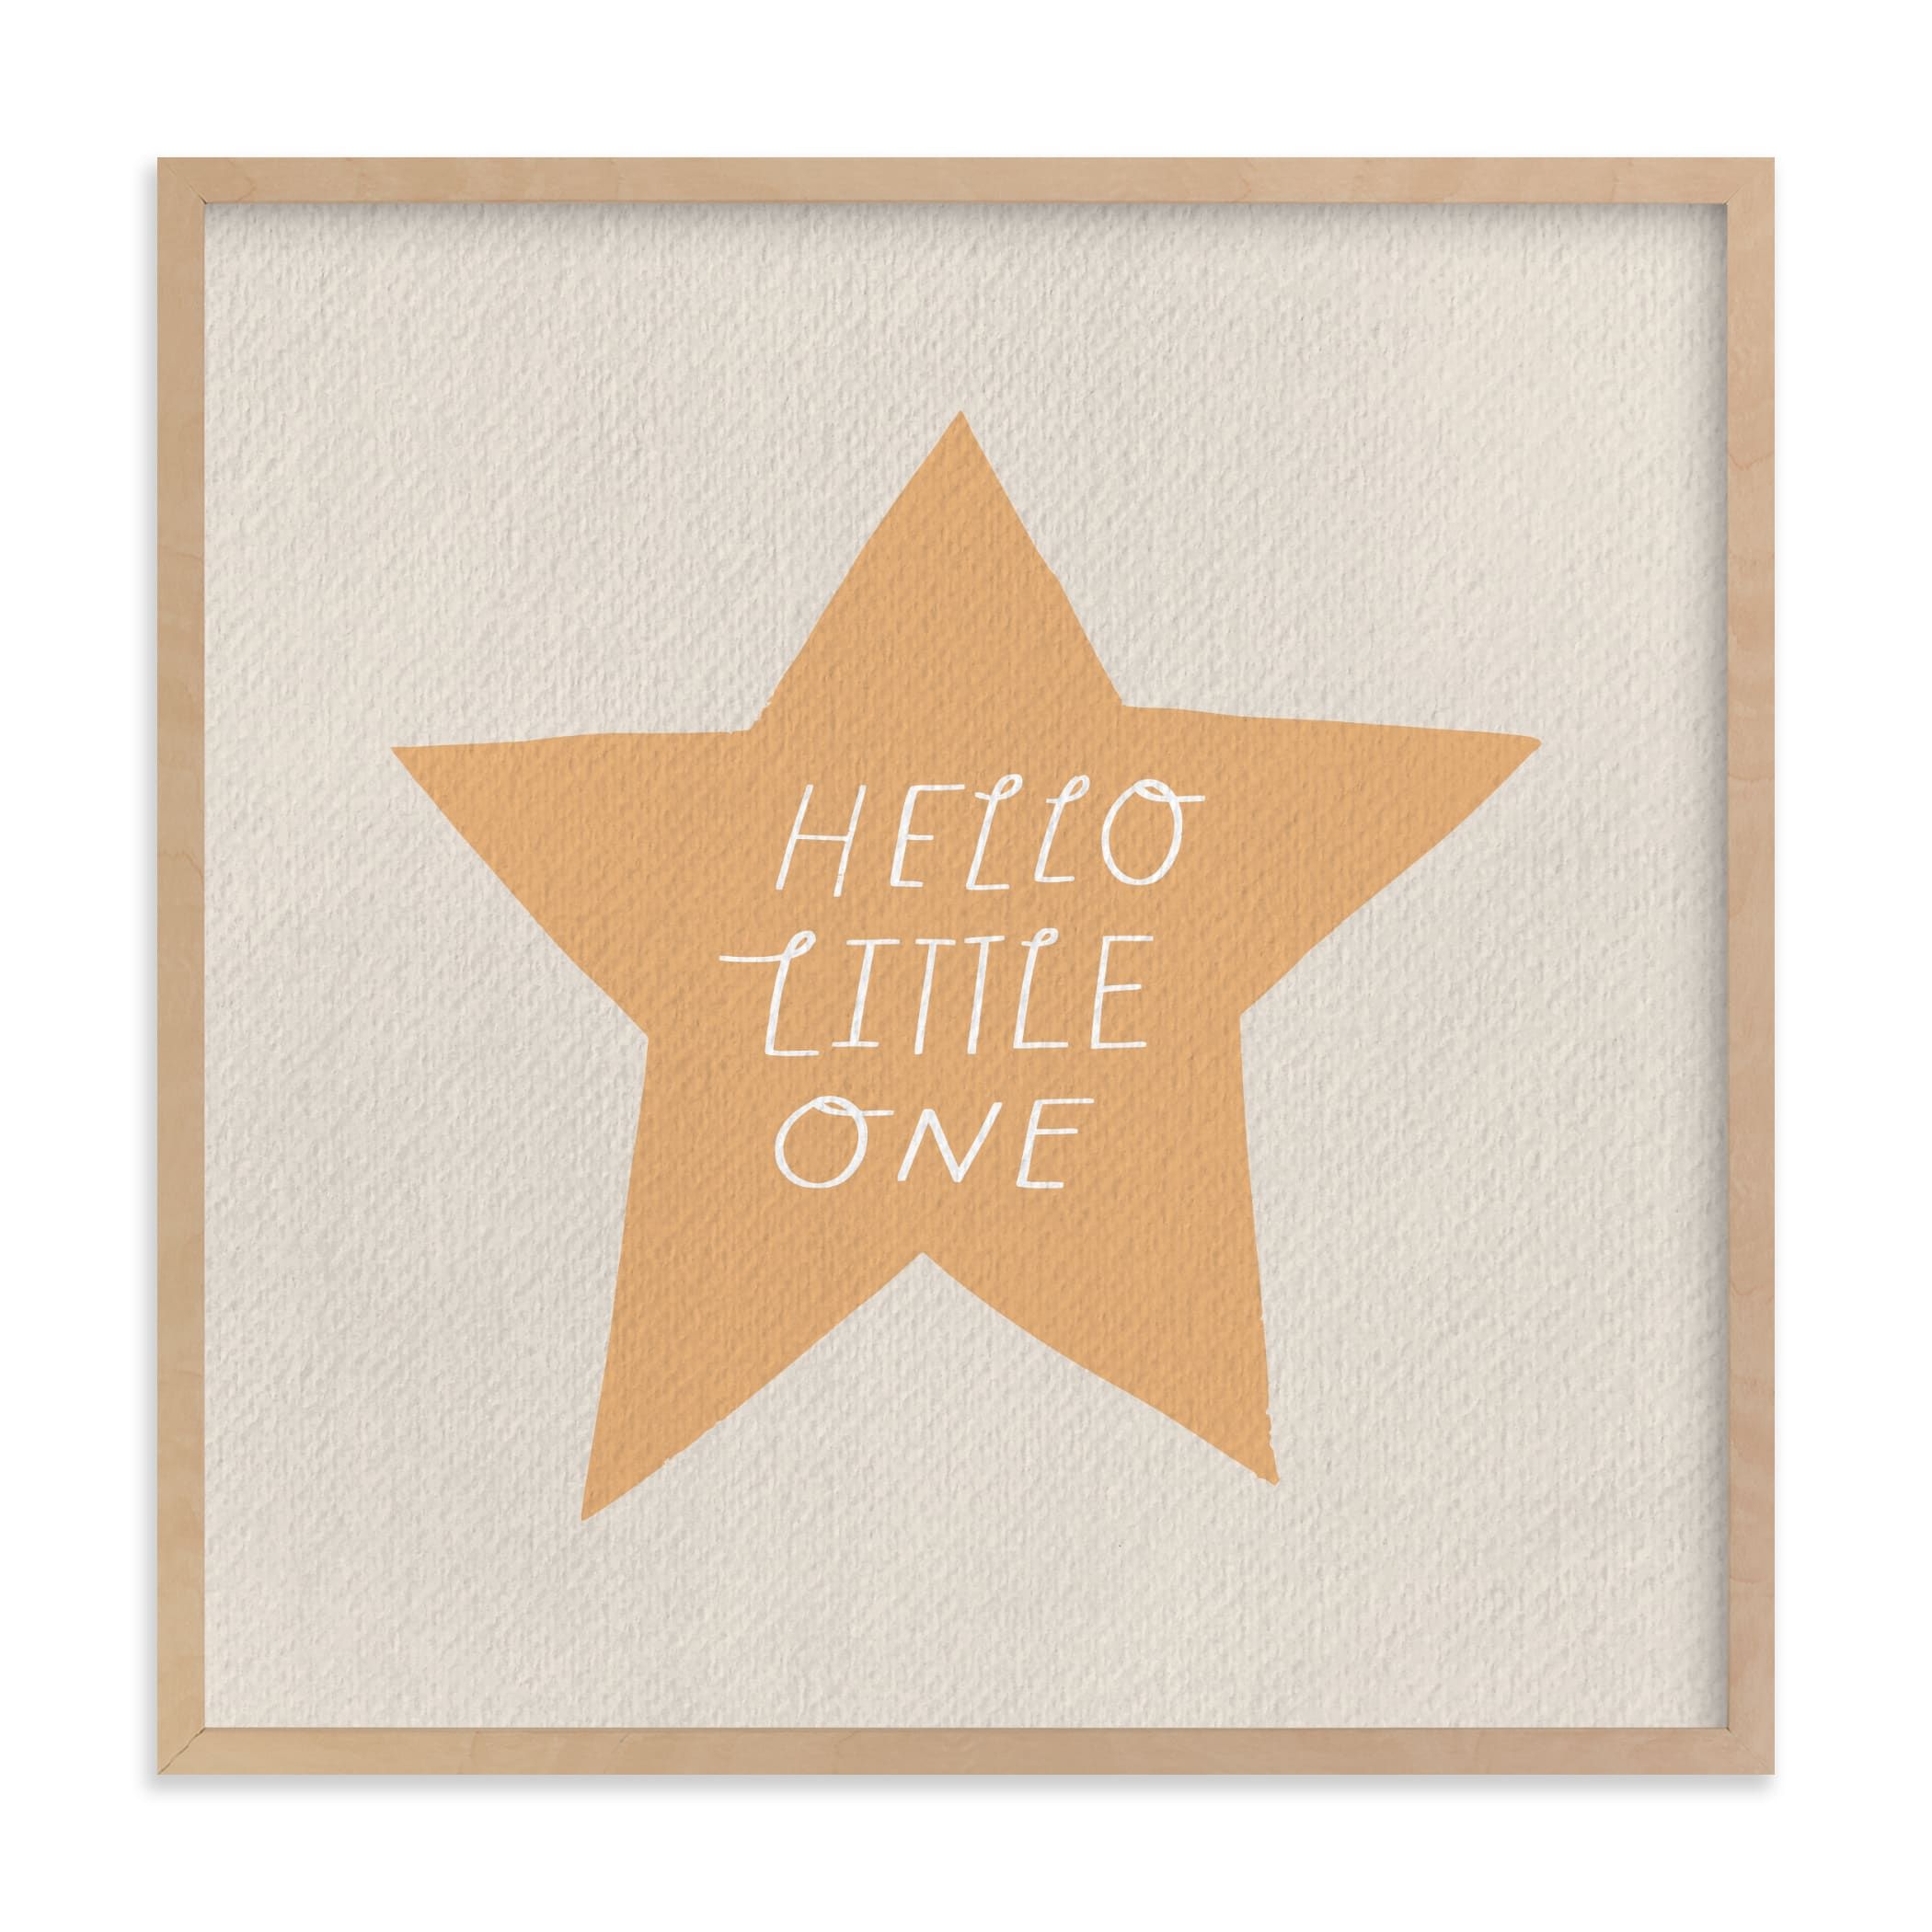 "Hello Little One" - Graphic Limited Edition Art Print by Little Miss Missy. | Minted